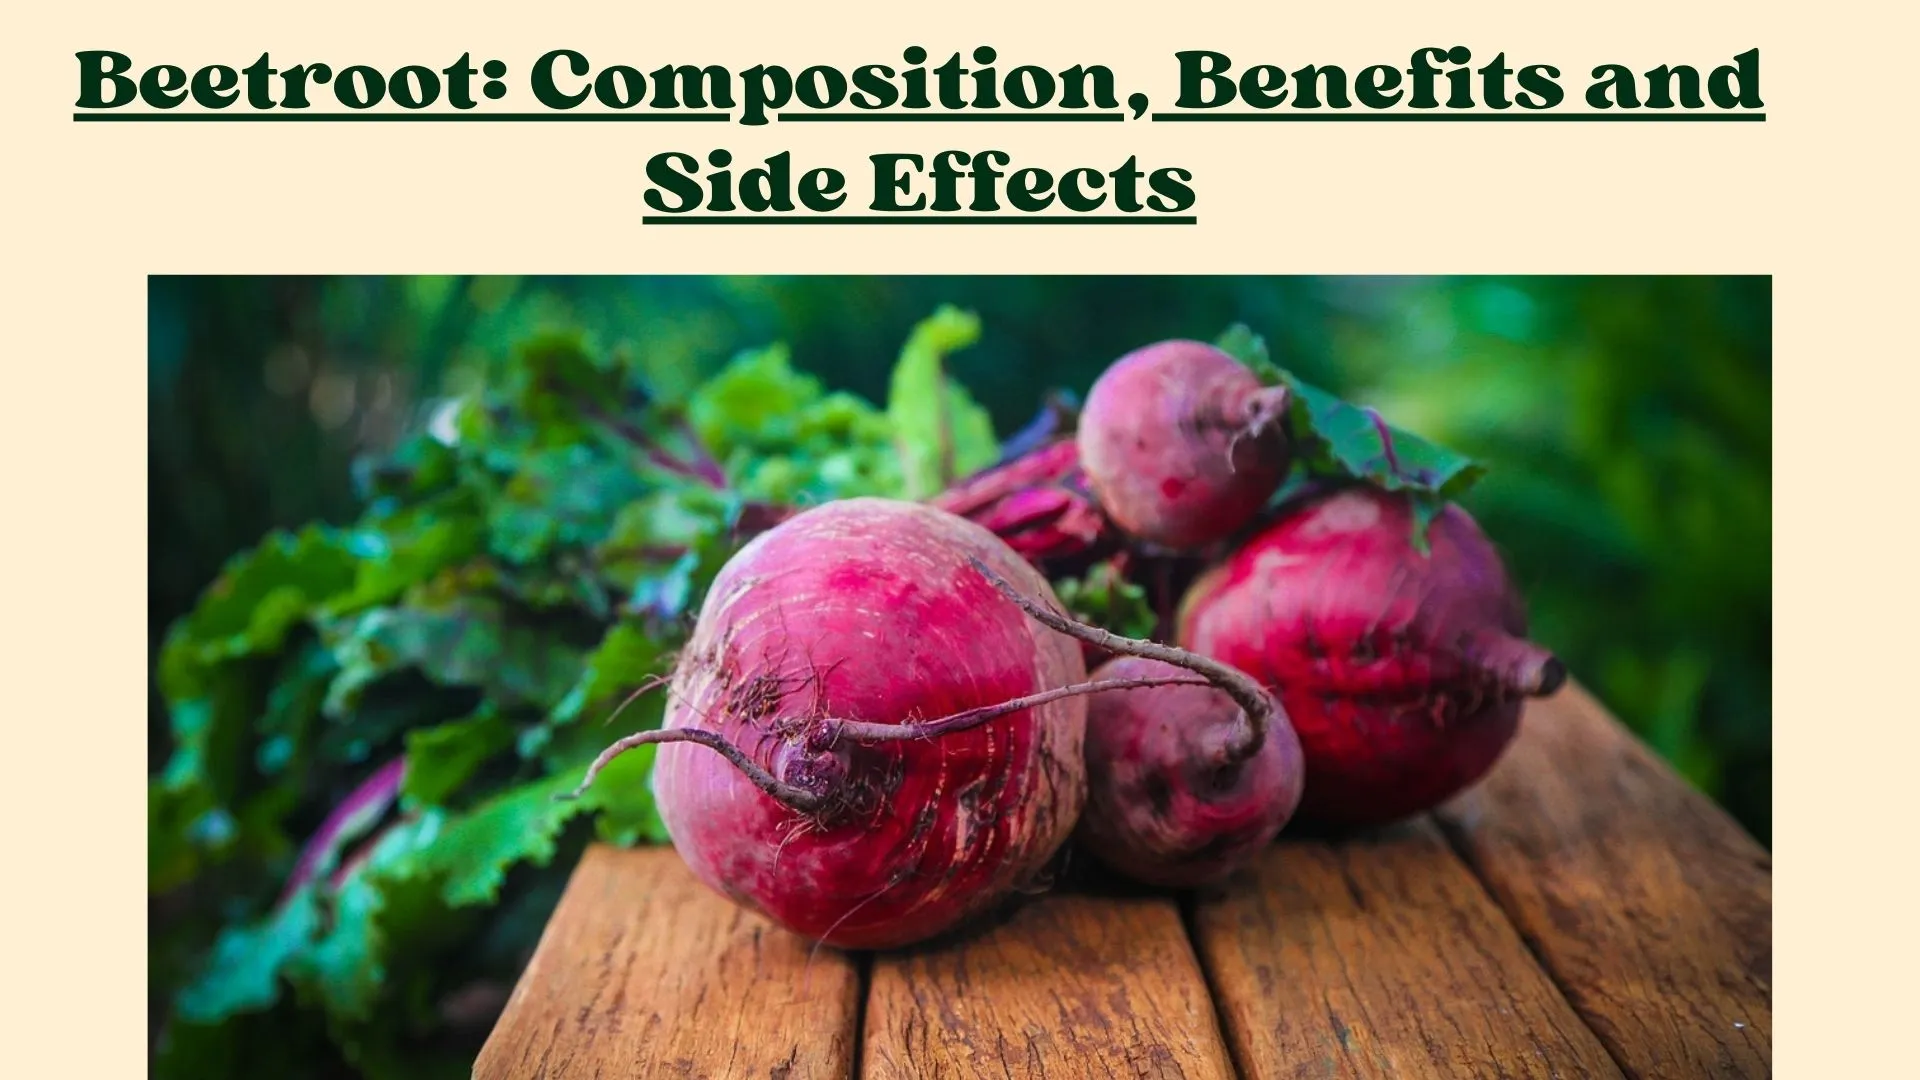 Beetroot: Composition, Benefits and Side Effects